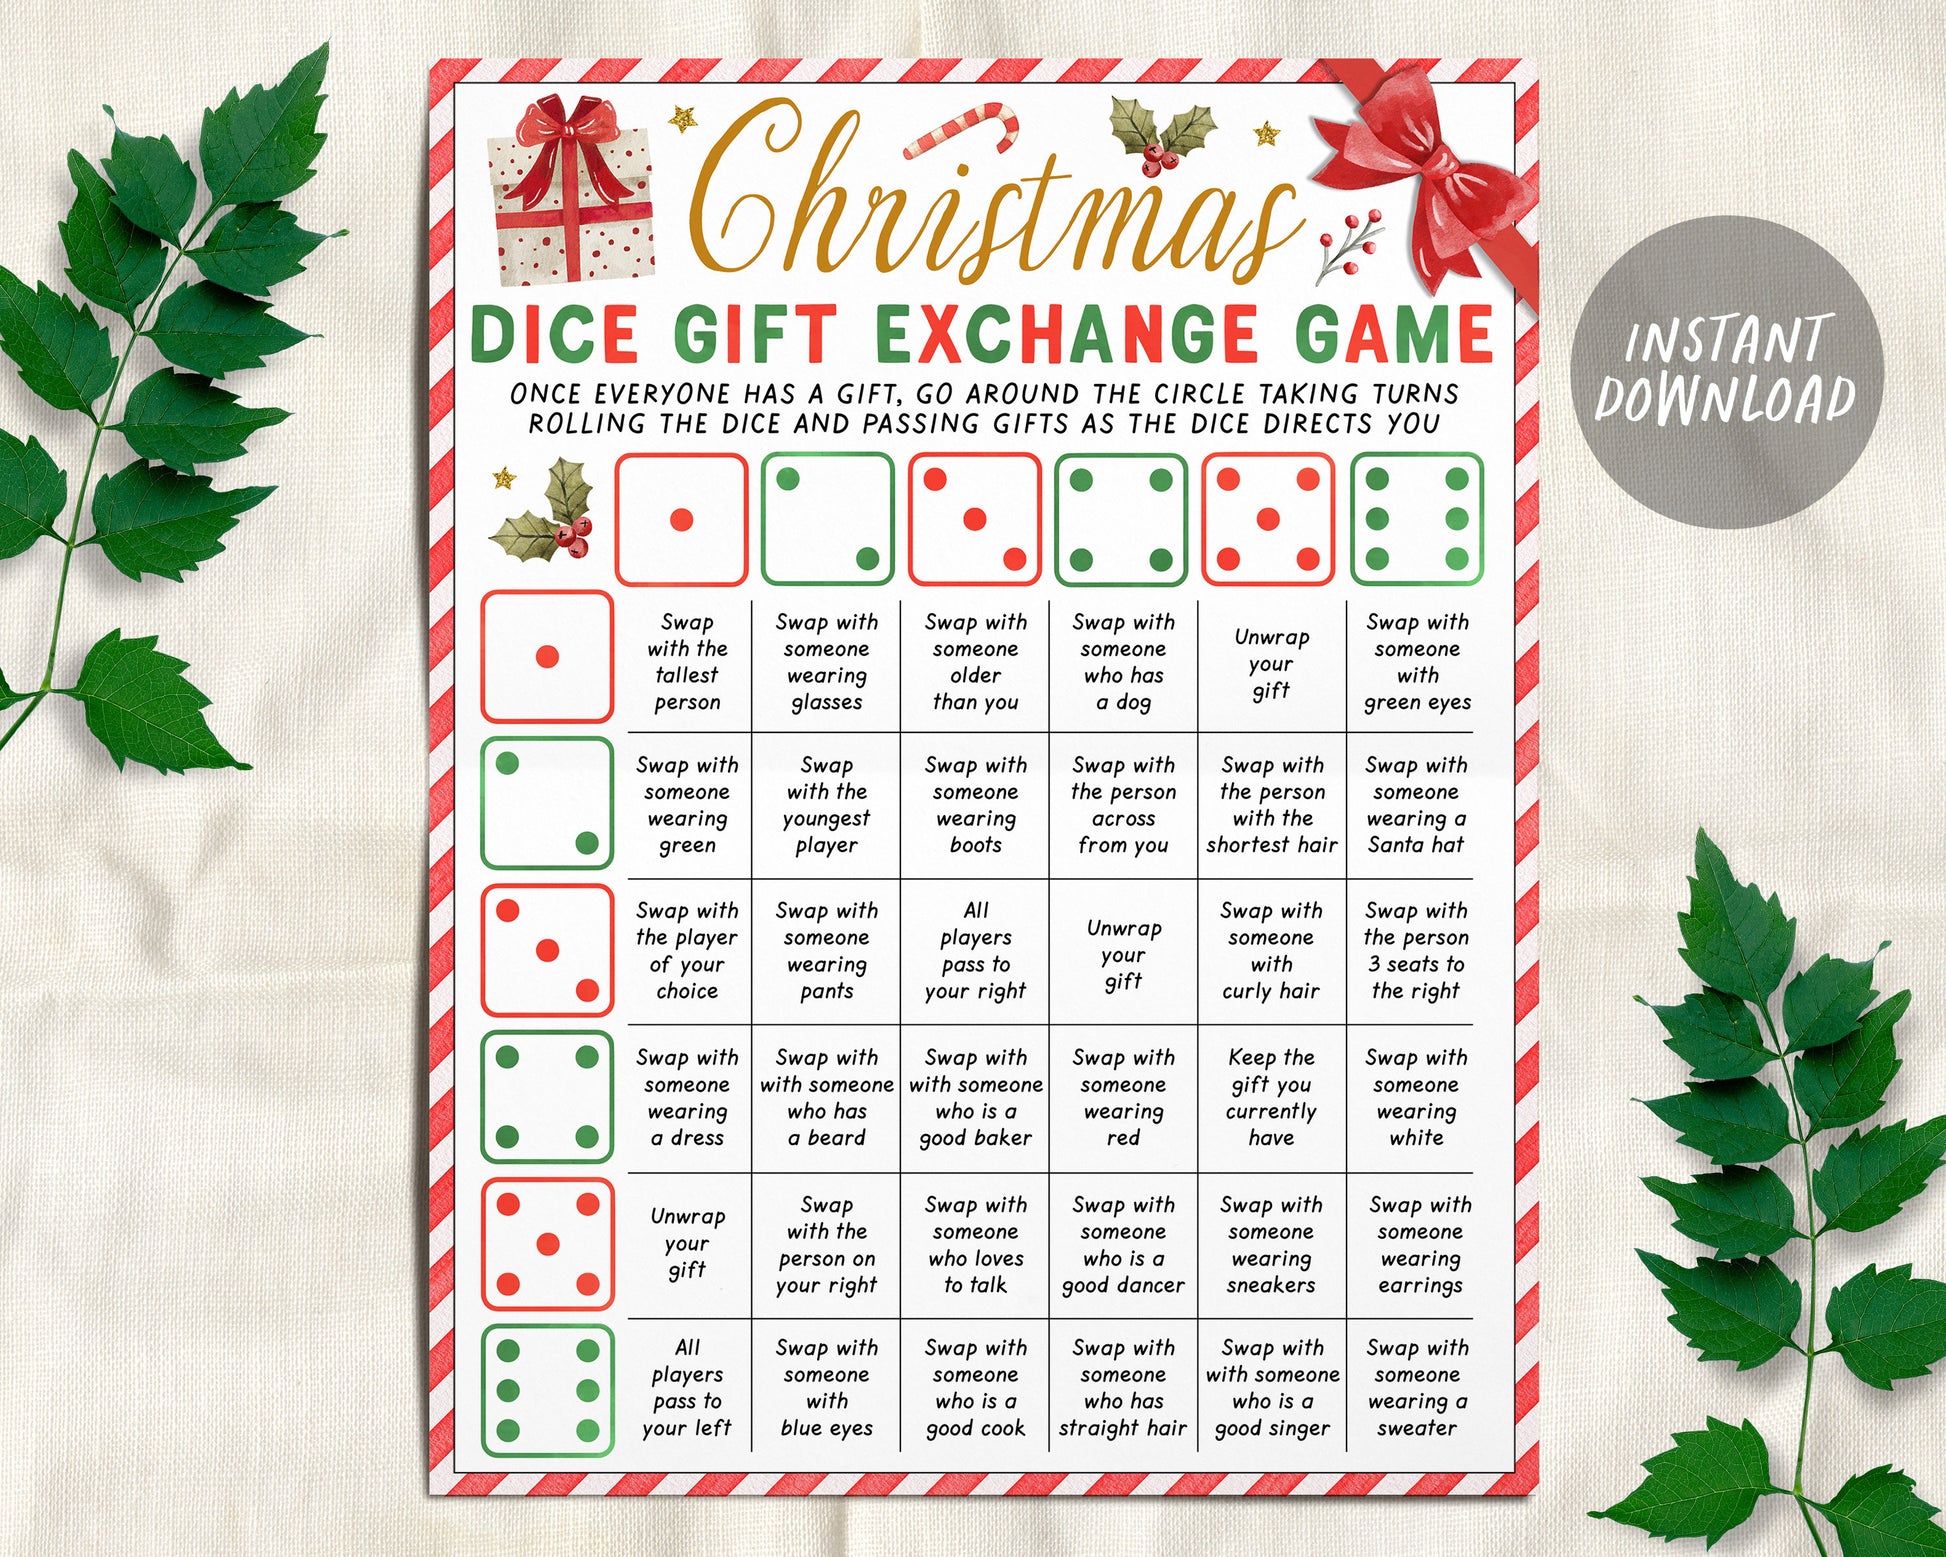 Roll the Dice Gift Exchange Printable White Elephant Gift 